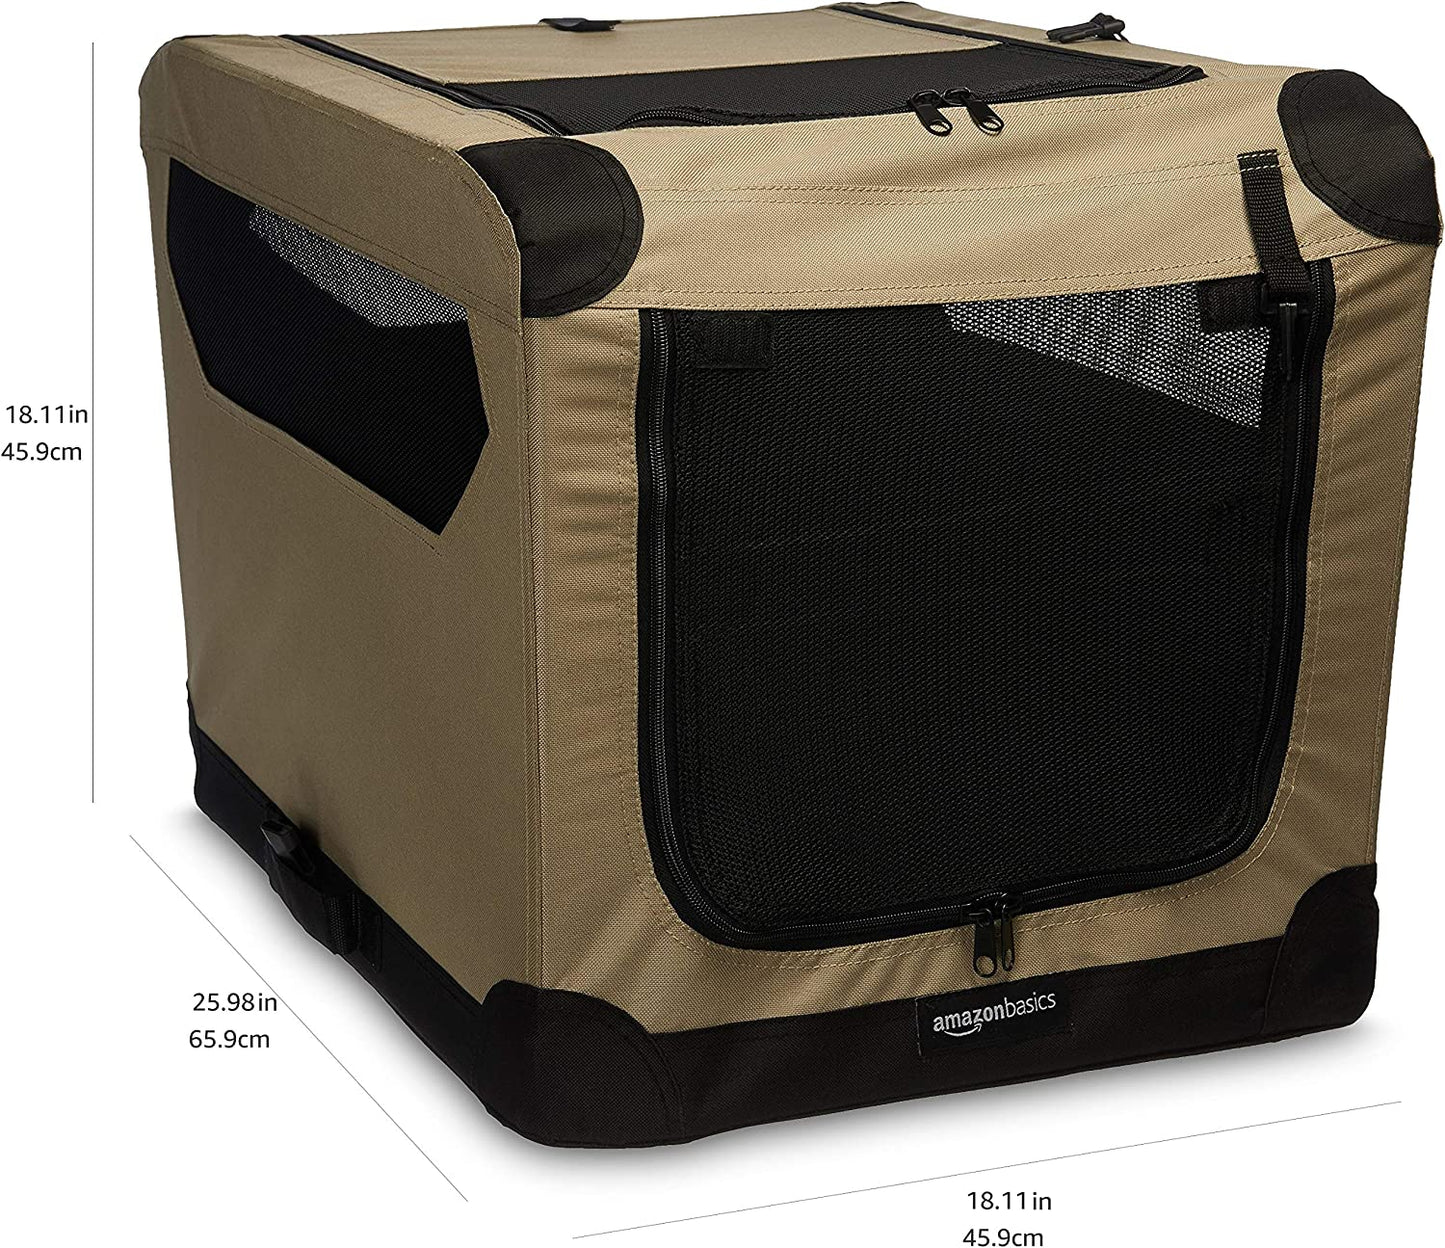 Amazon Basics 3-Door Collapsible Soft-Sided Folding Soft Dog Travel Crate Kennel